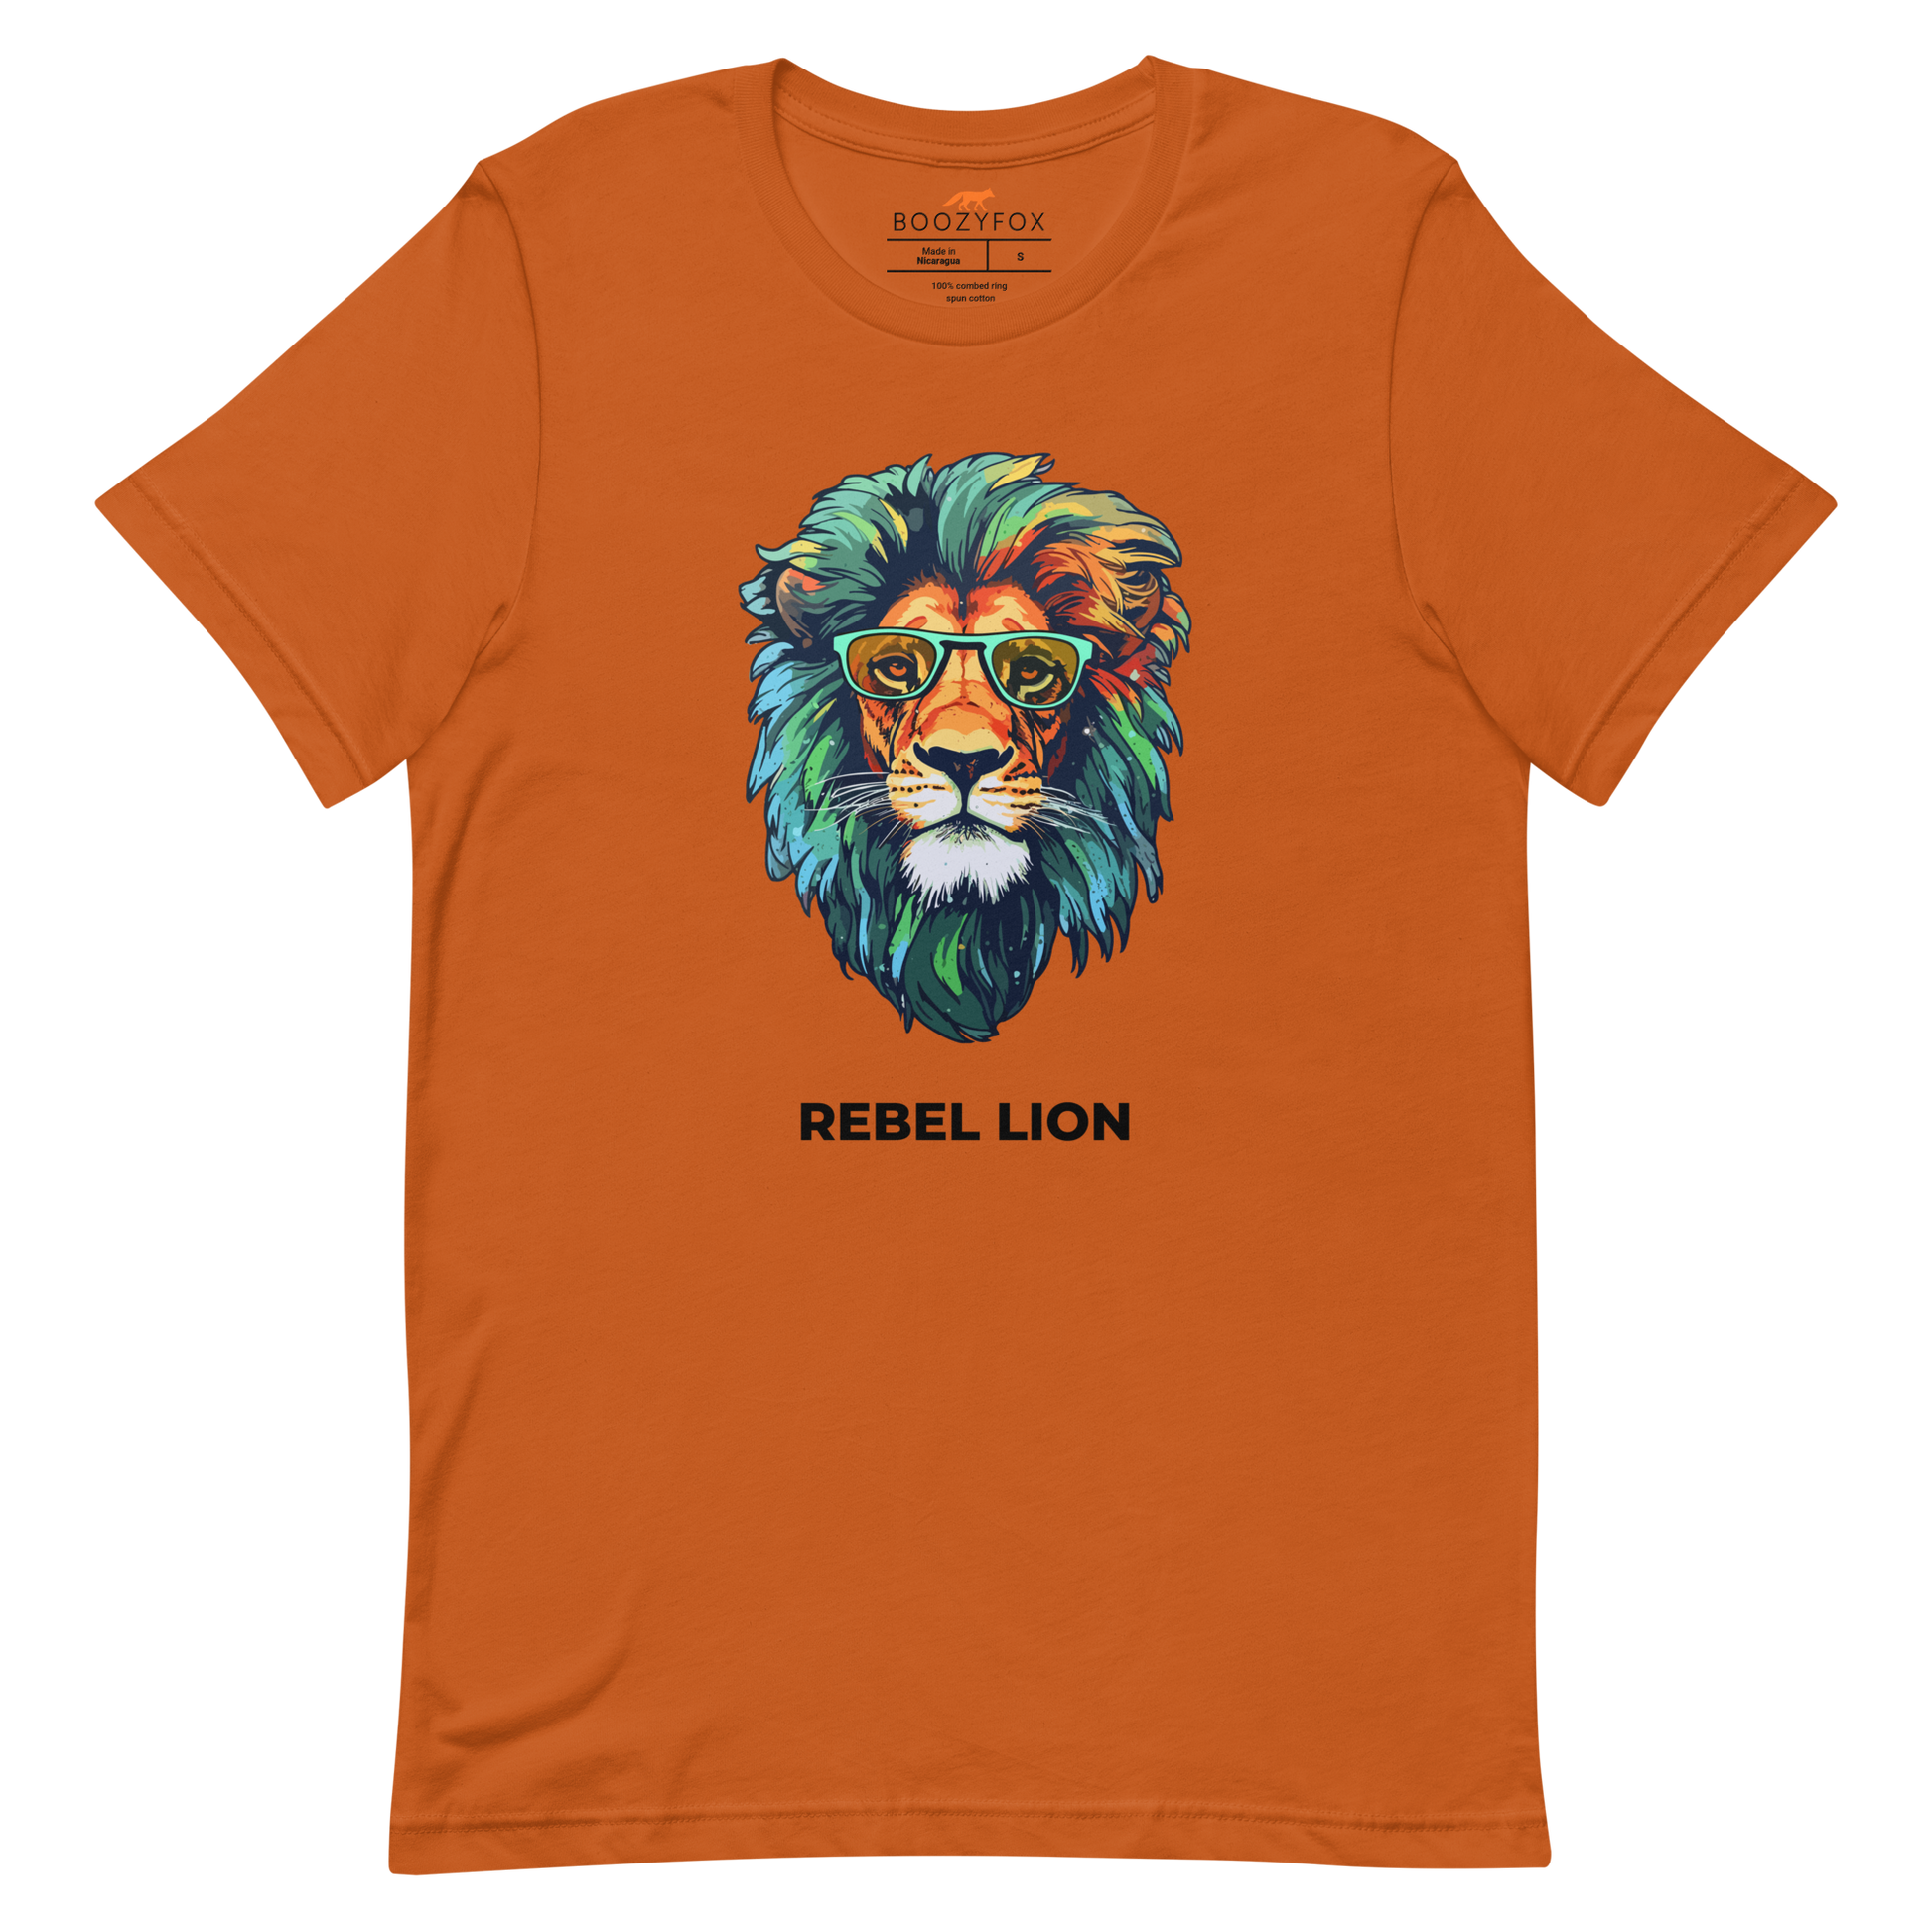 Autumn Colored Premium Lion T-Shirt featuring a captivating Rebel Lion graphic on the chest - Funny Graphic Lion Tees - Boozy Fox